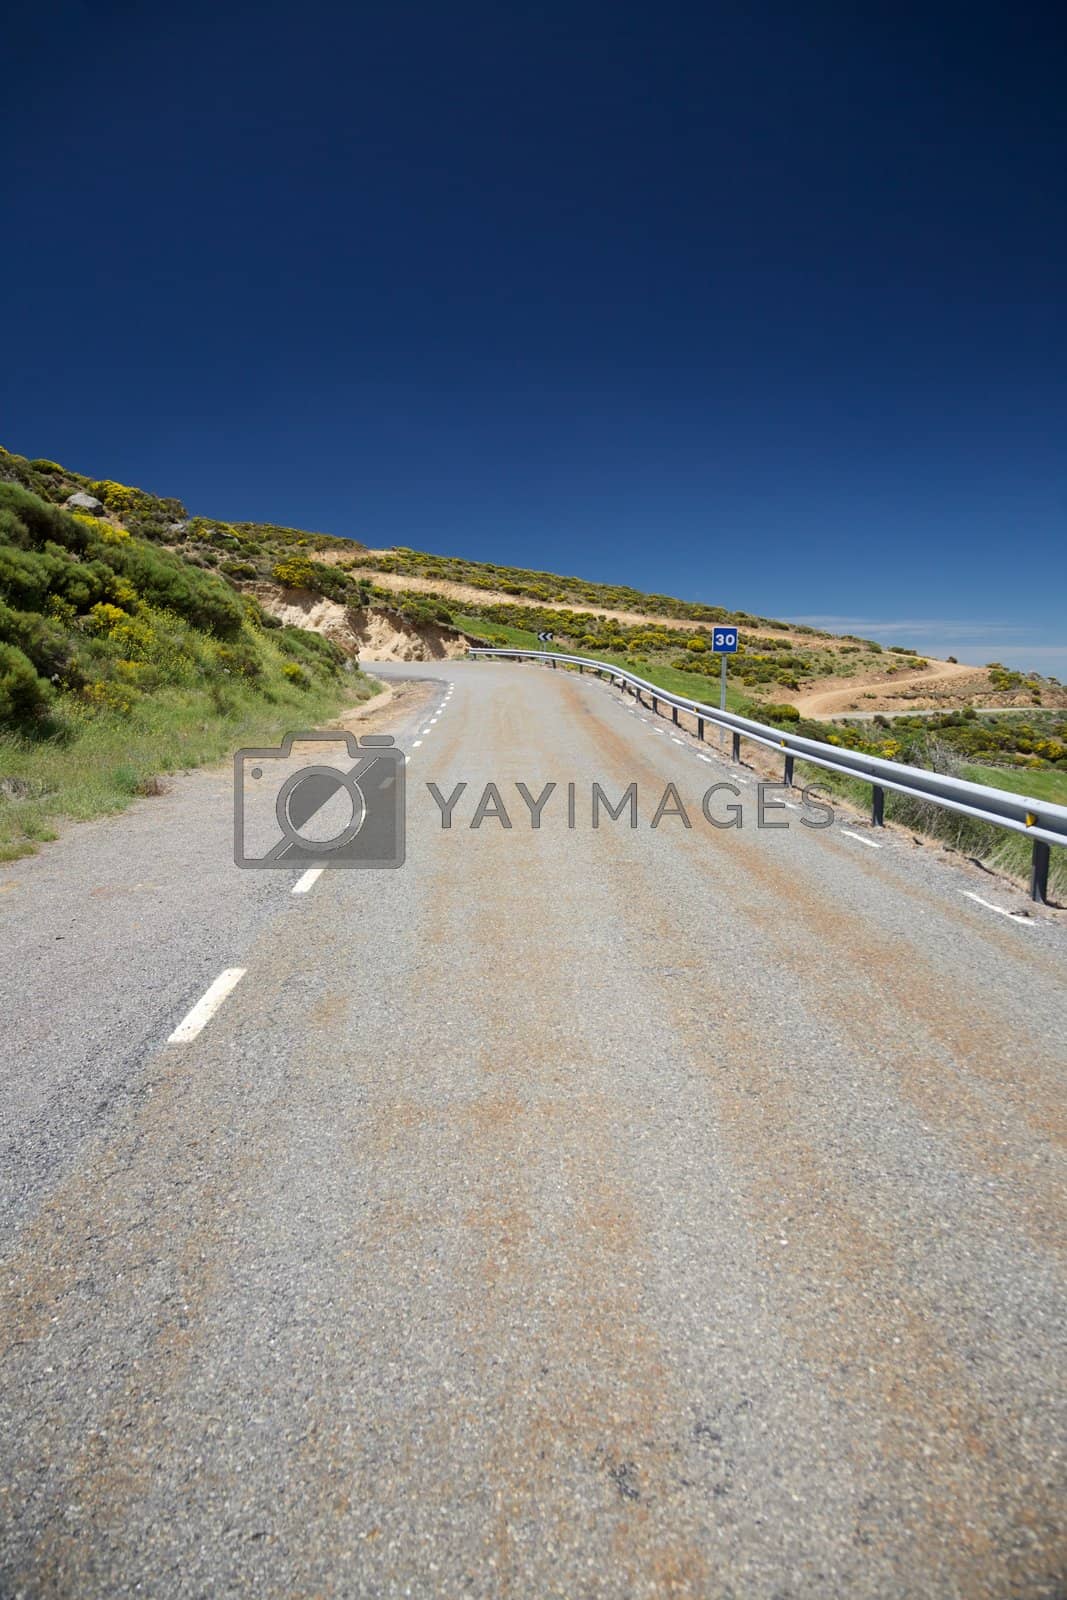 Royalty free image of slow speed rural road by quintanilla